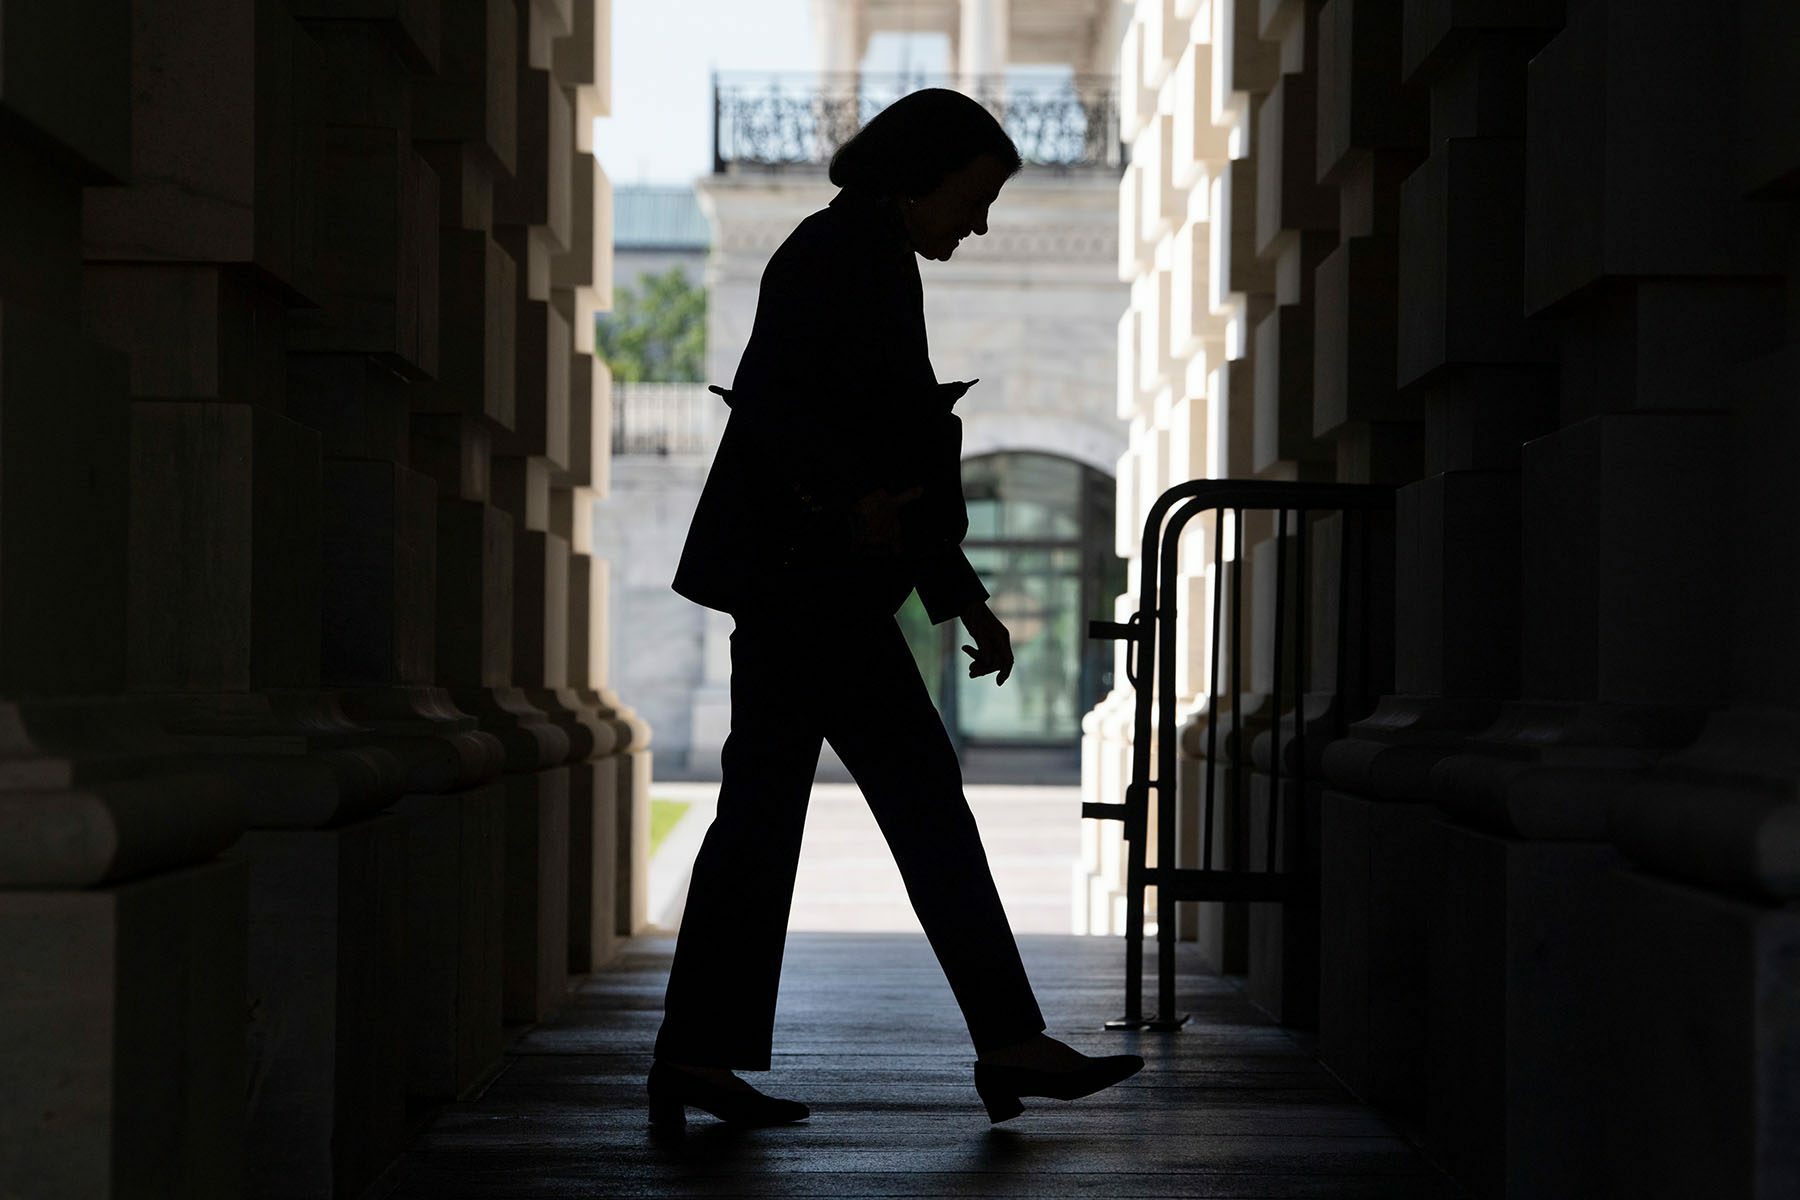 The silhouette of Sen. Dianne Feinstein is seen as she enters the Capitol.